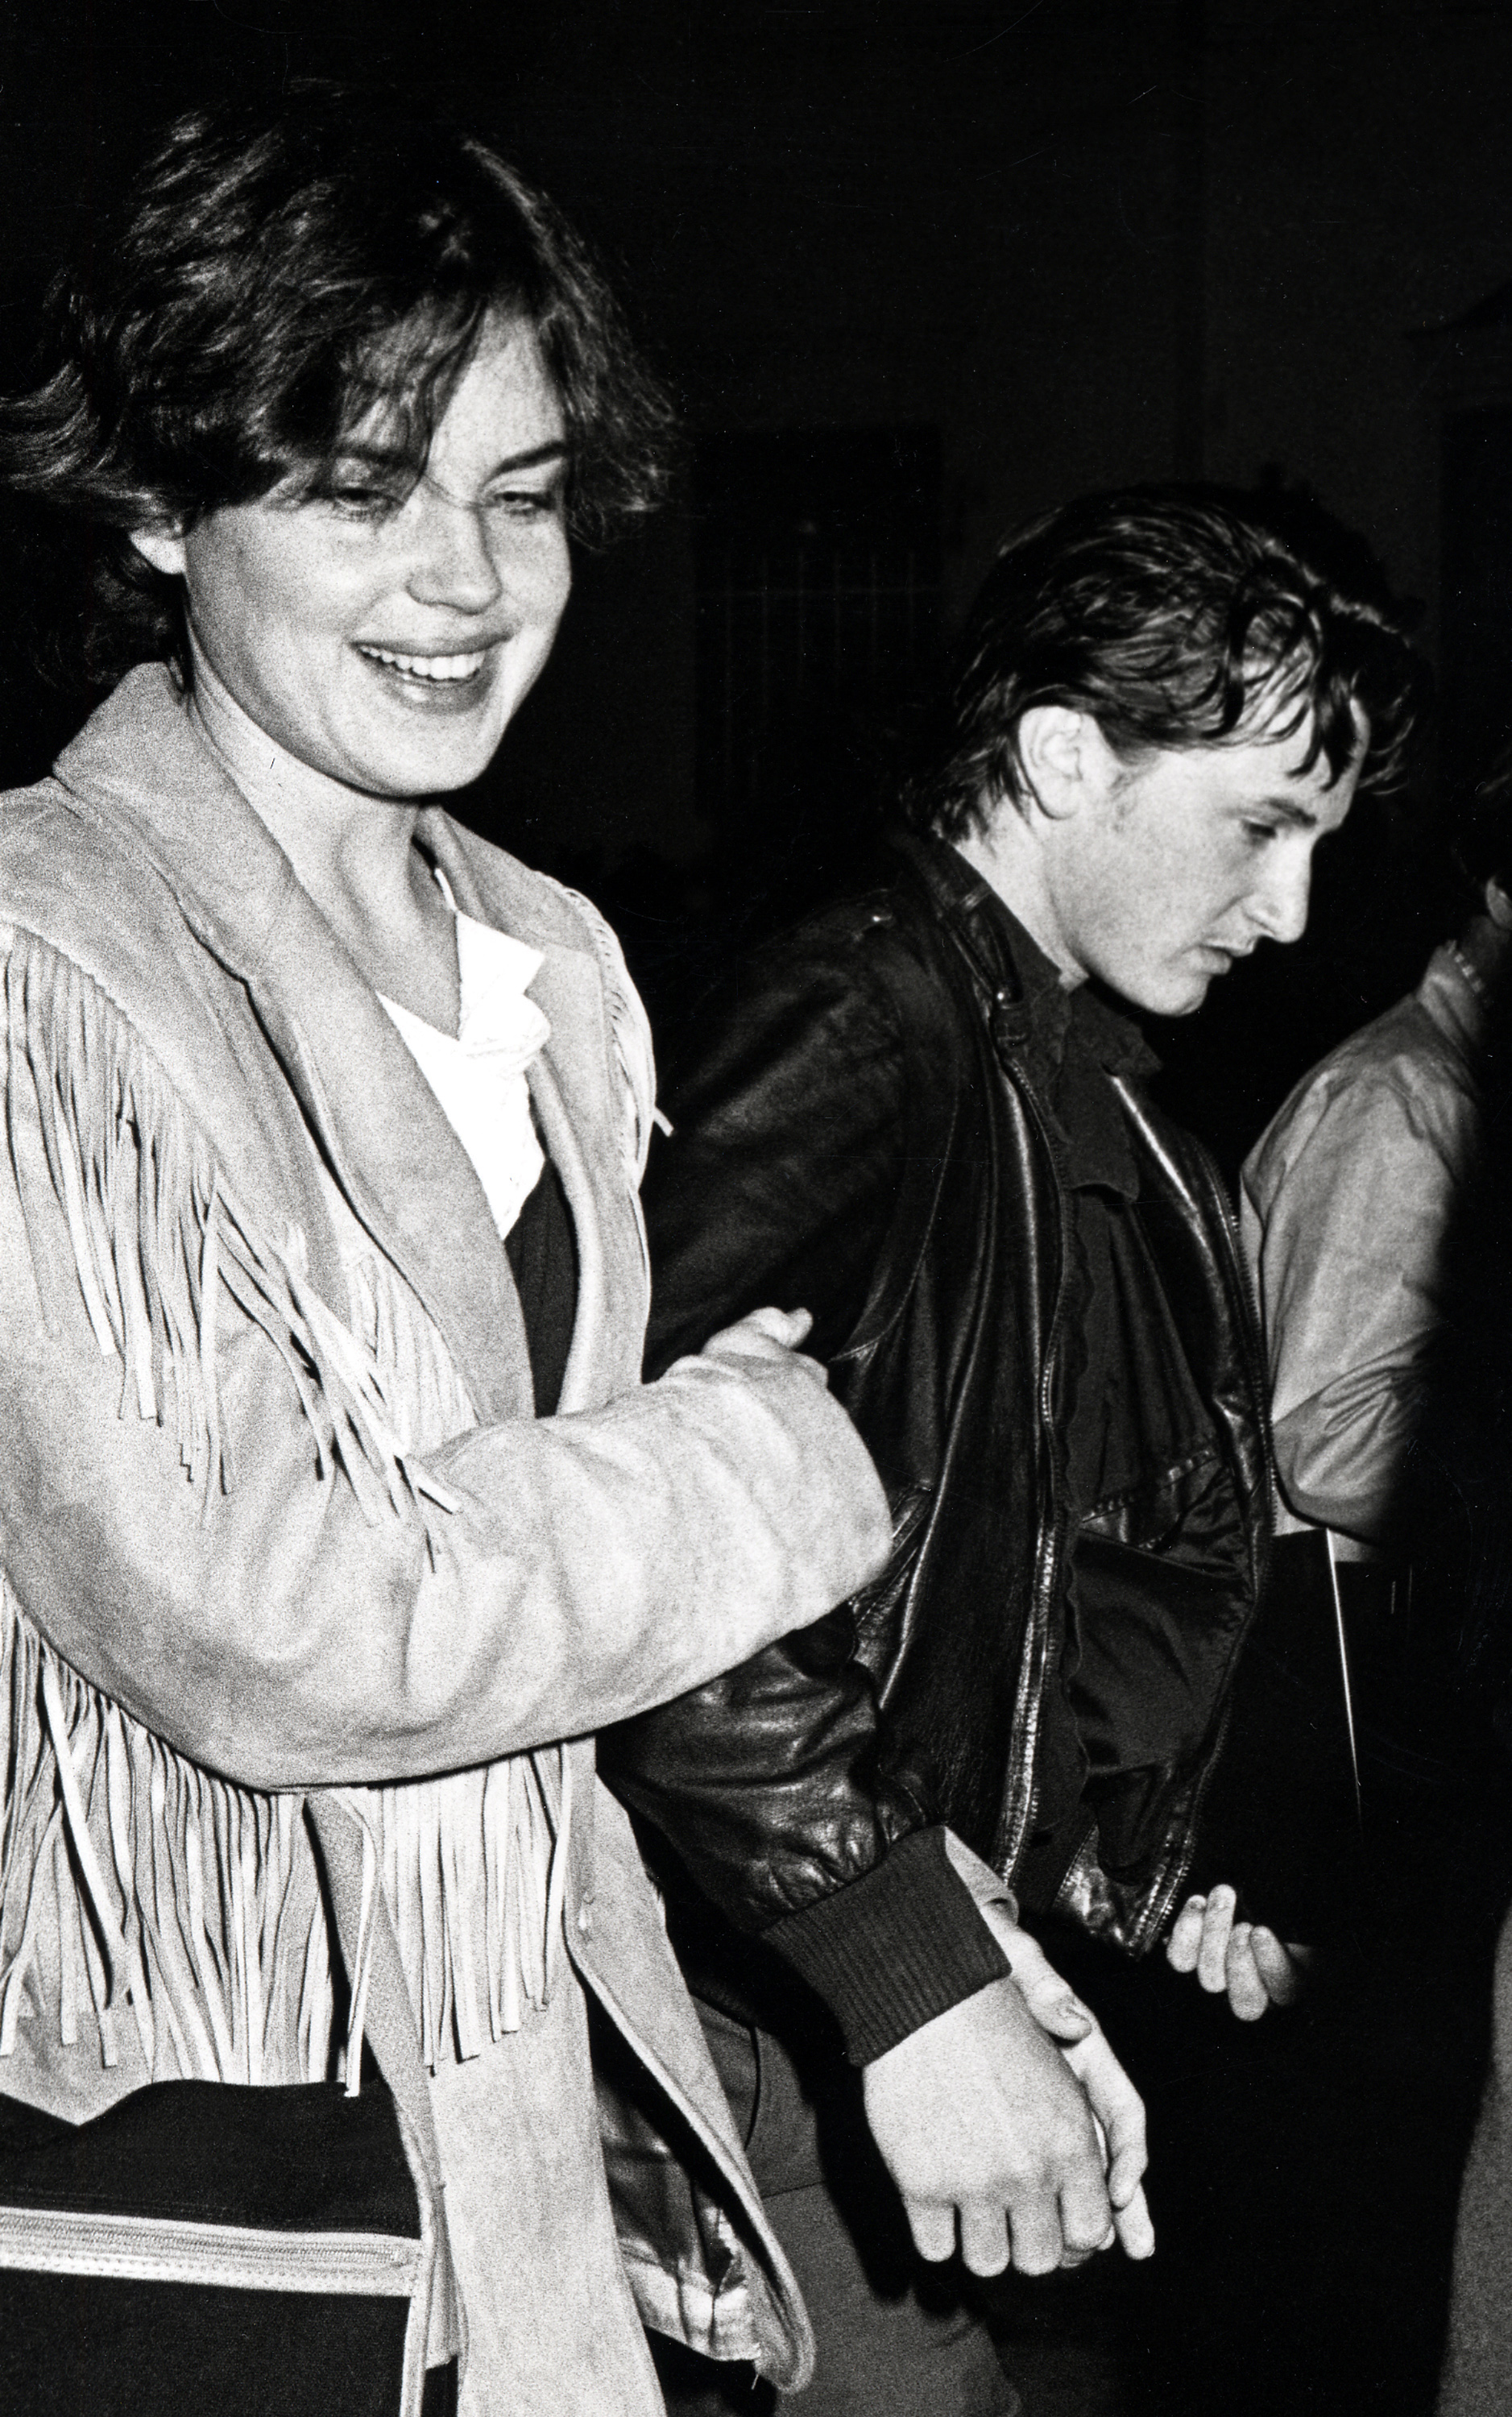 Elizabeth McGovern and Sean Penn attend the "Moscow On the Hudson" premiere on March 30, 1984 | Source: Getty Images